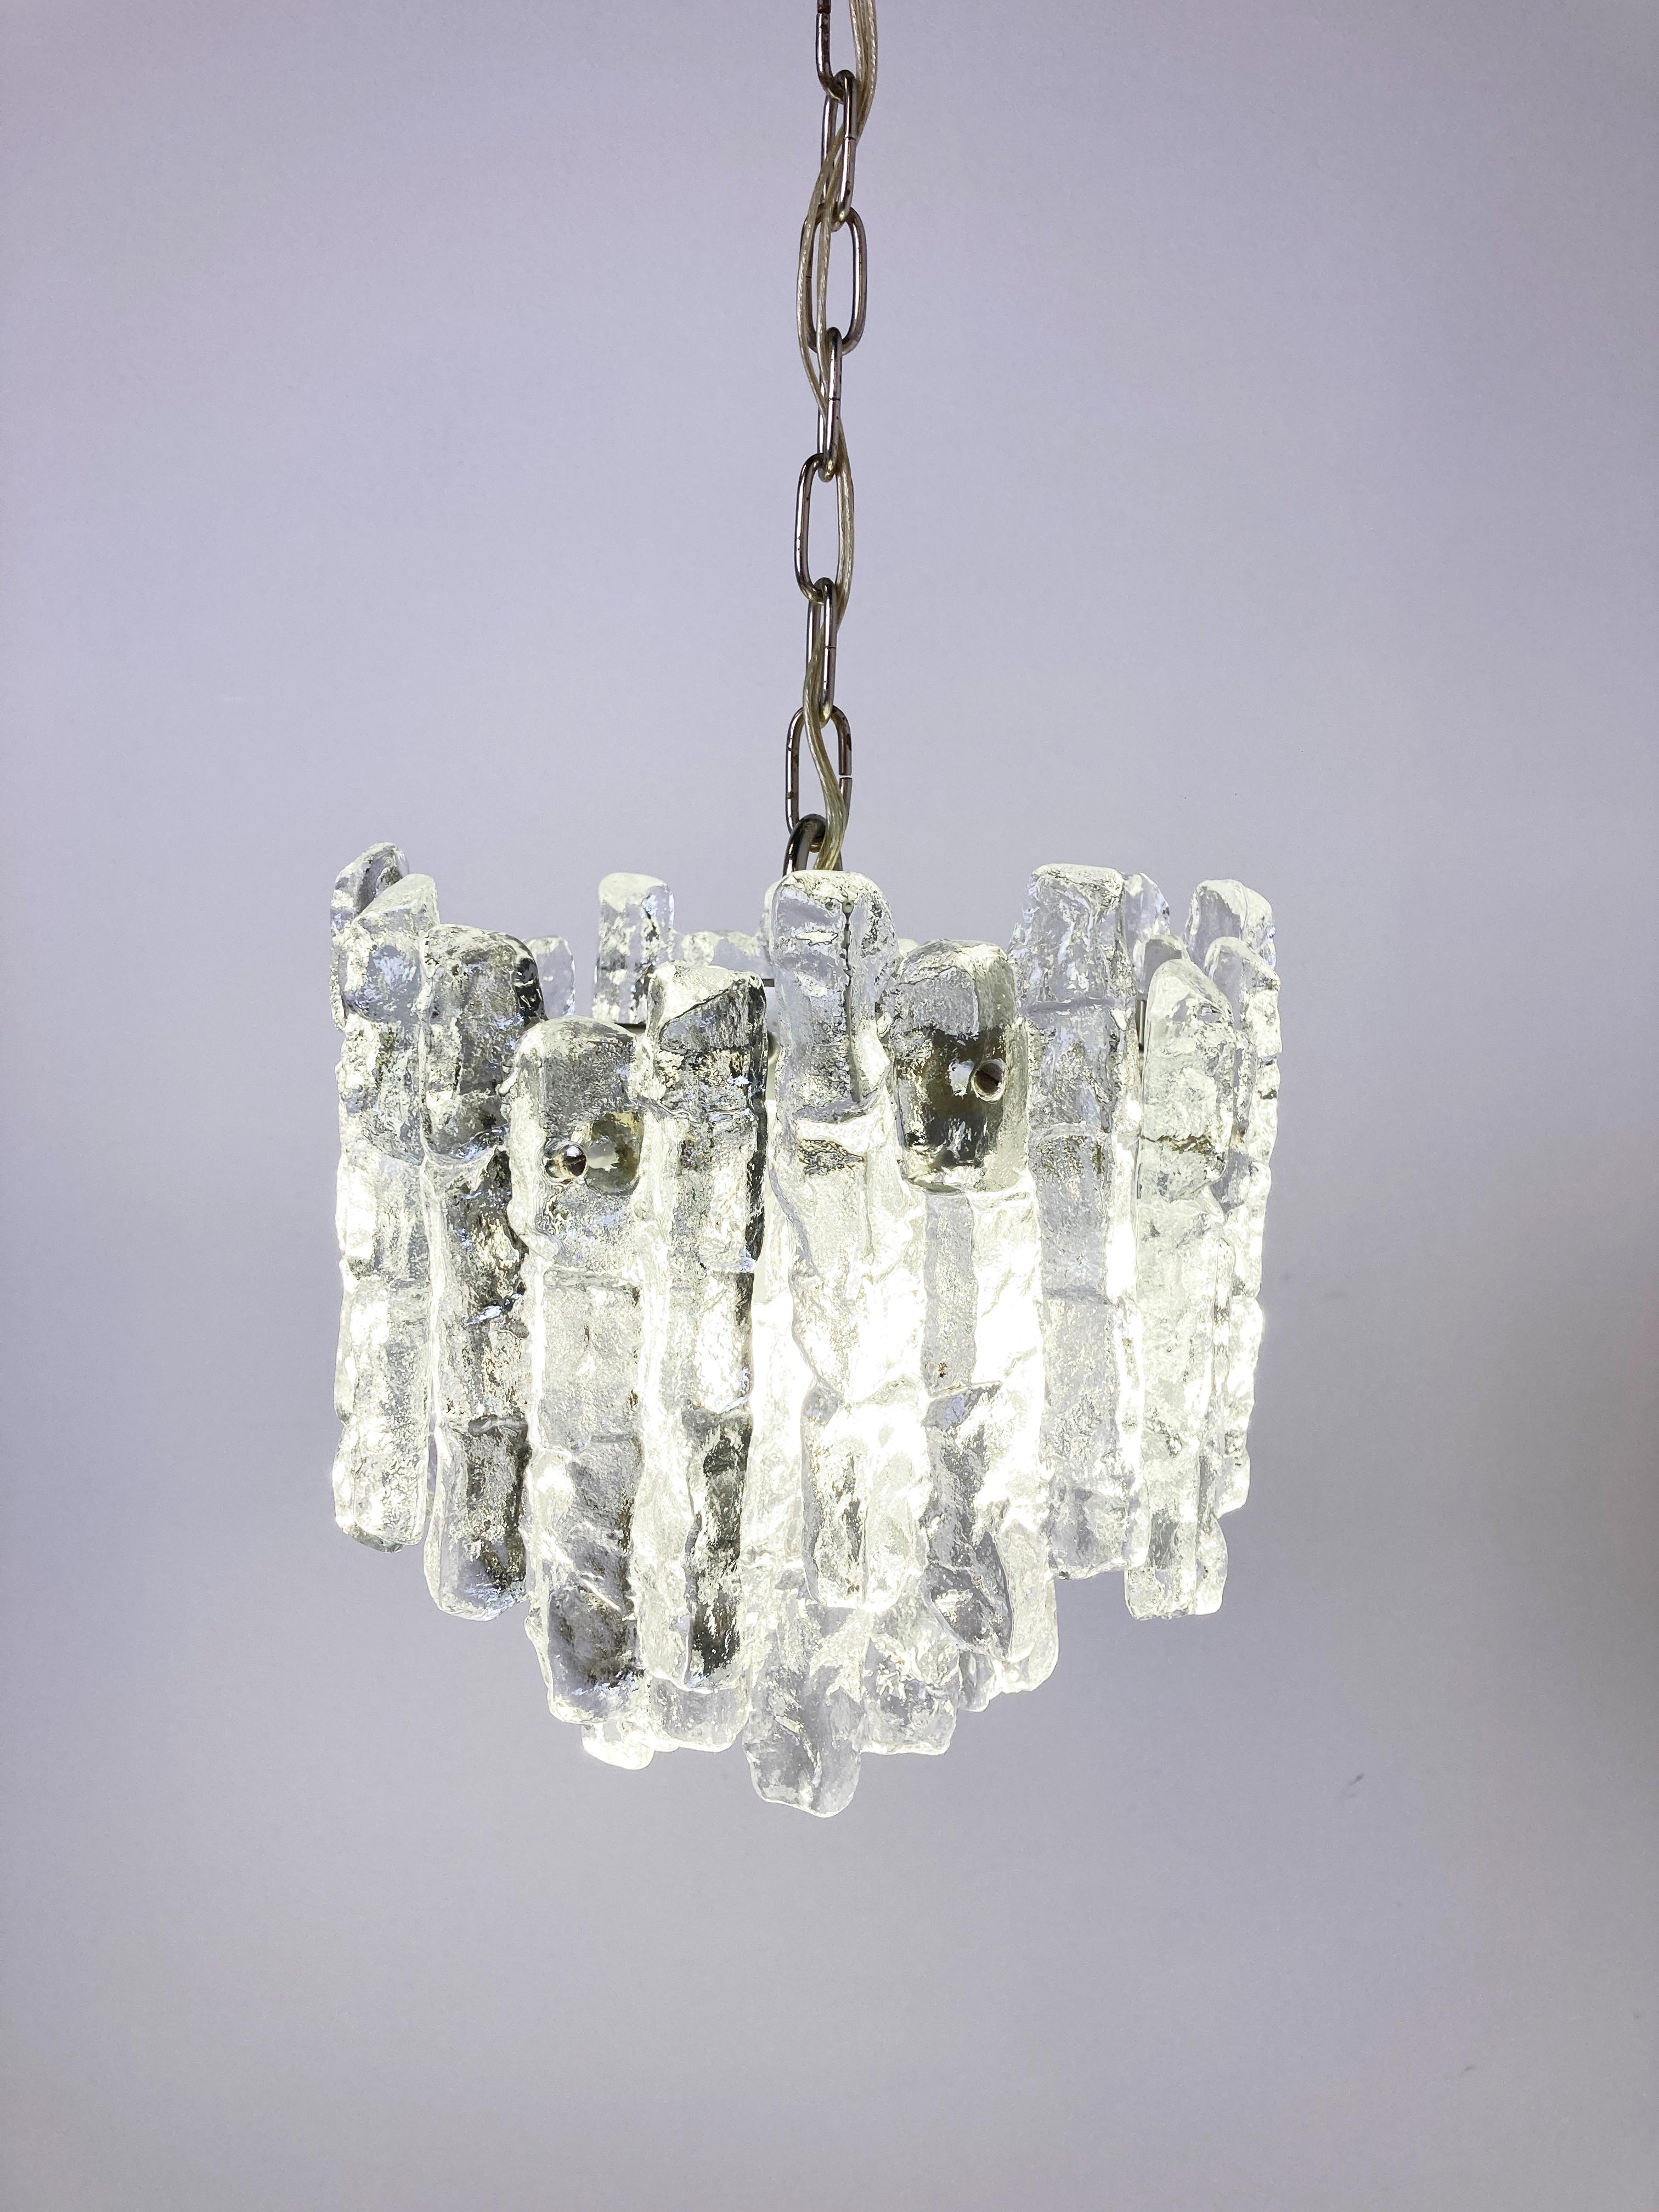 Fantastic ice crystal shaped pendant light by Kalmar.

Handmade glass on a metal frame

This chandelier emits a wonderful light. 

Works with a regular E27 light bulb.

Good condition, tested and ready to be used.

1960s -